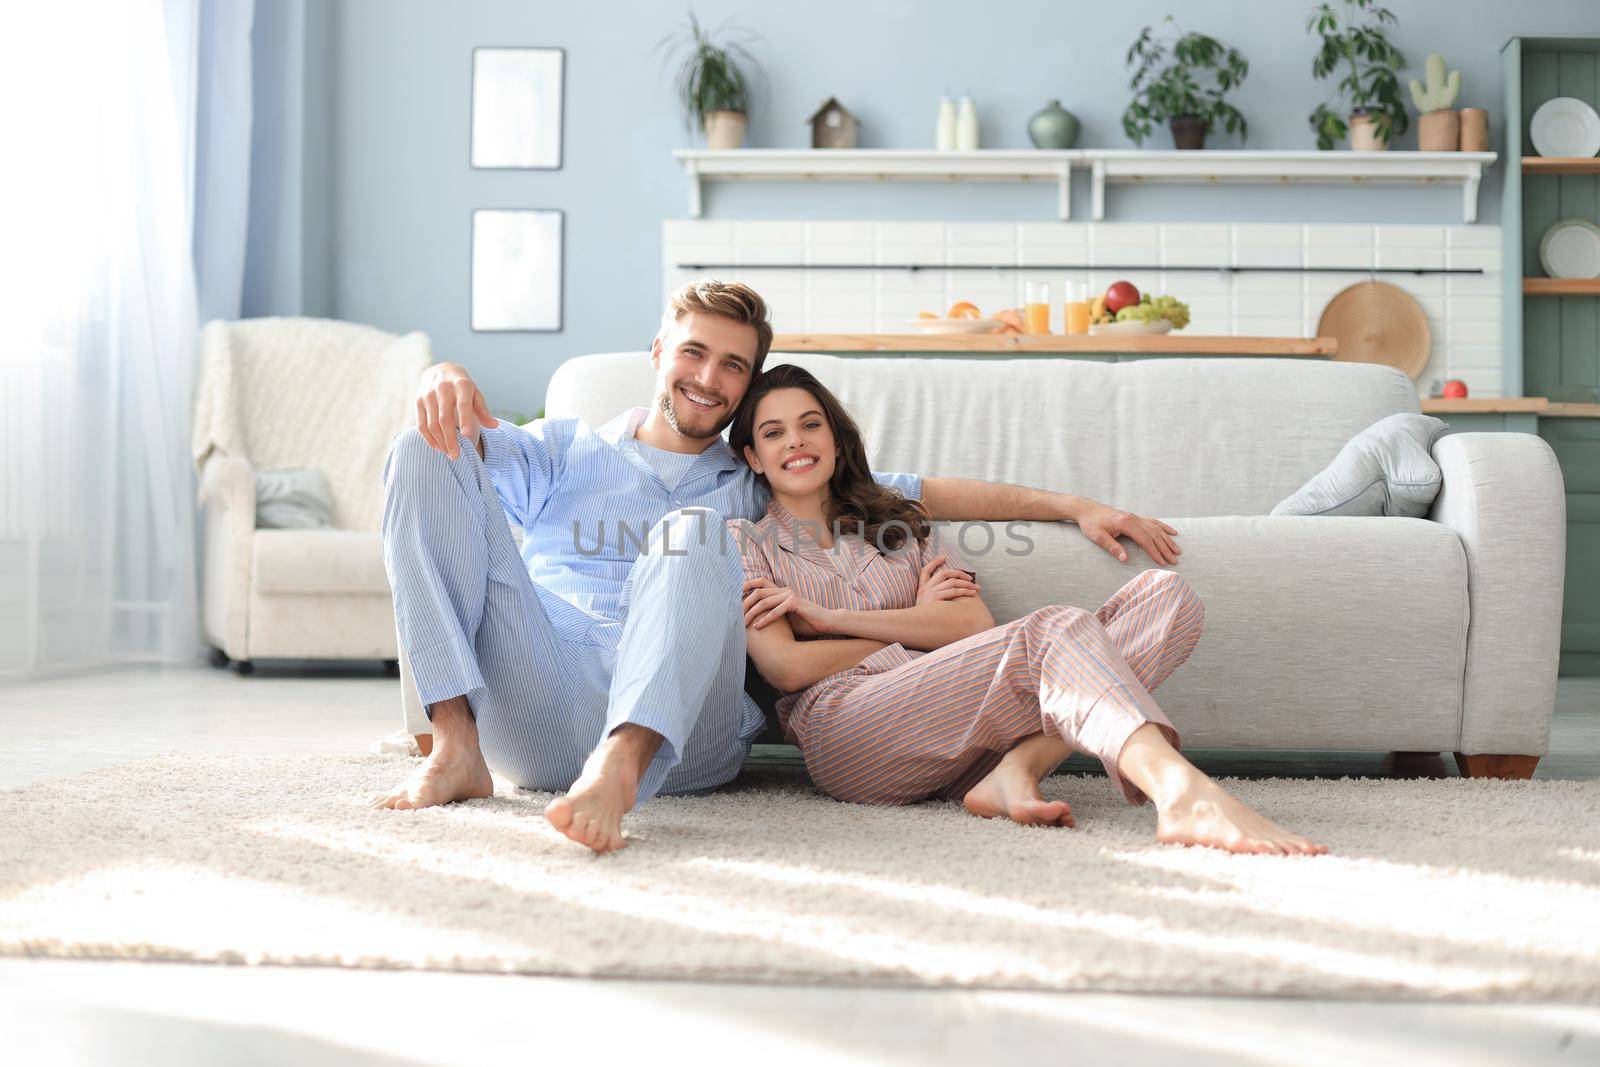 The happy couple in pajamas sitting on the floor background of the sofa in the living room